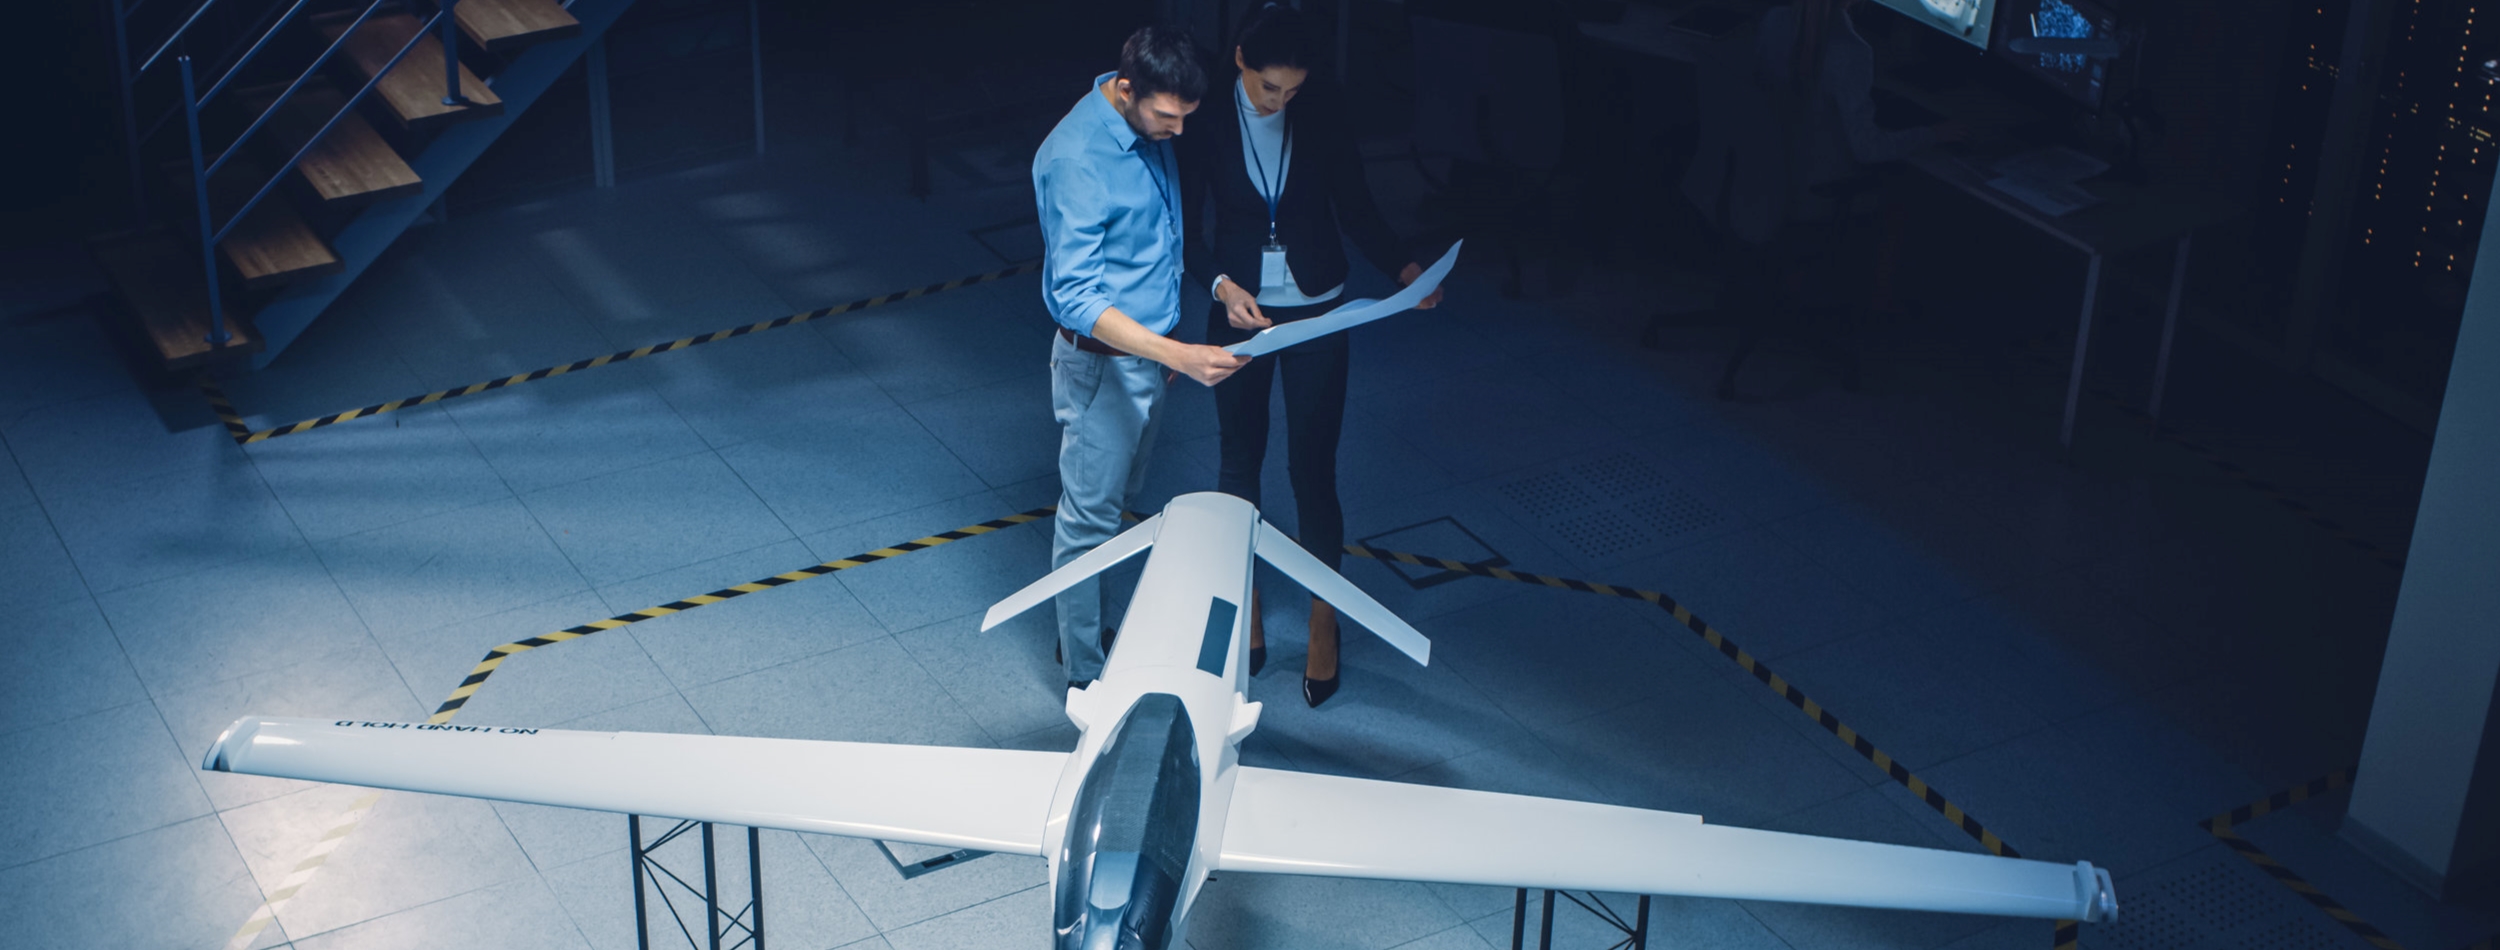 Meeting of Aerospace Engineers Work On Unmanned Aerial Vehicle Drone Prototype. Aviation Experts have Discussion. Industrial Facility with Aircraft Capable of GPS Surveillance and Military Missions